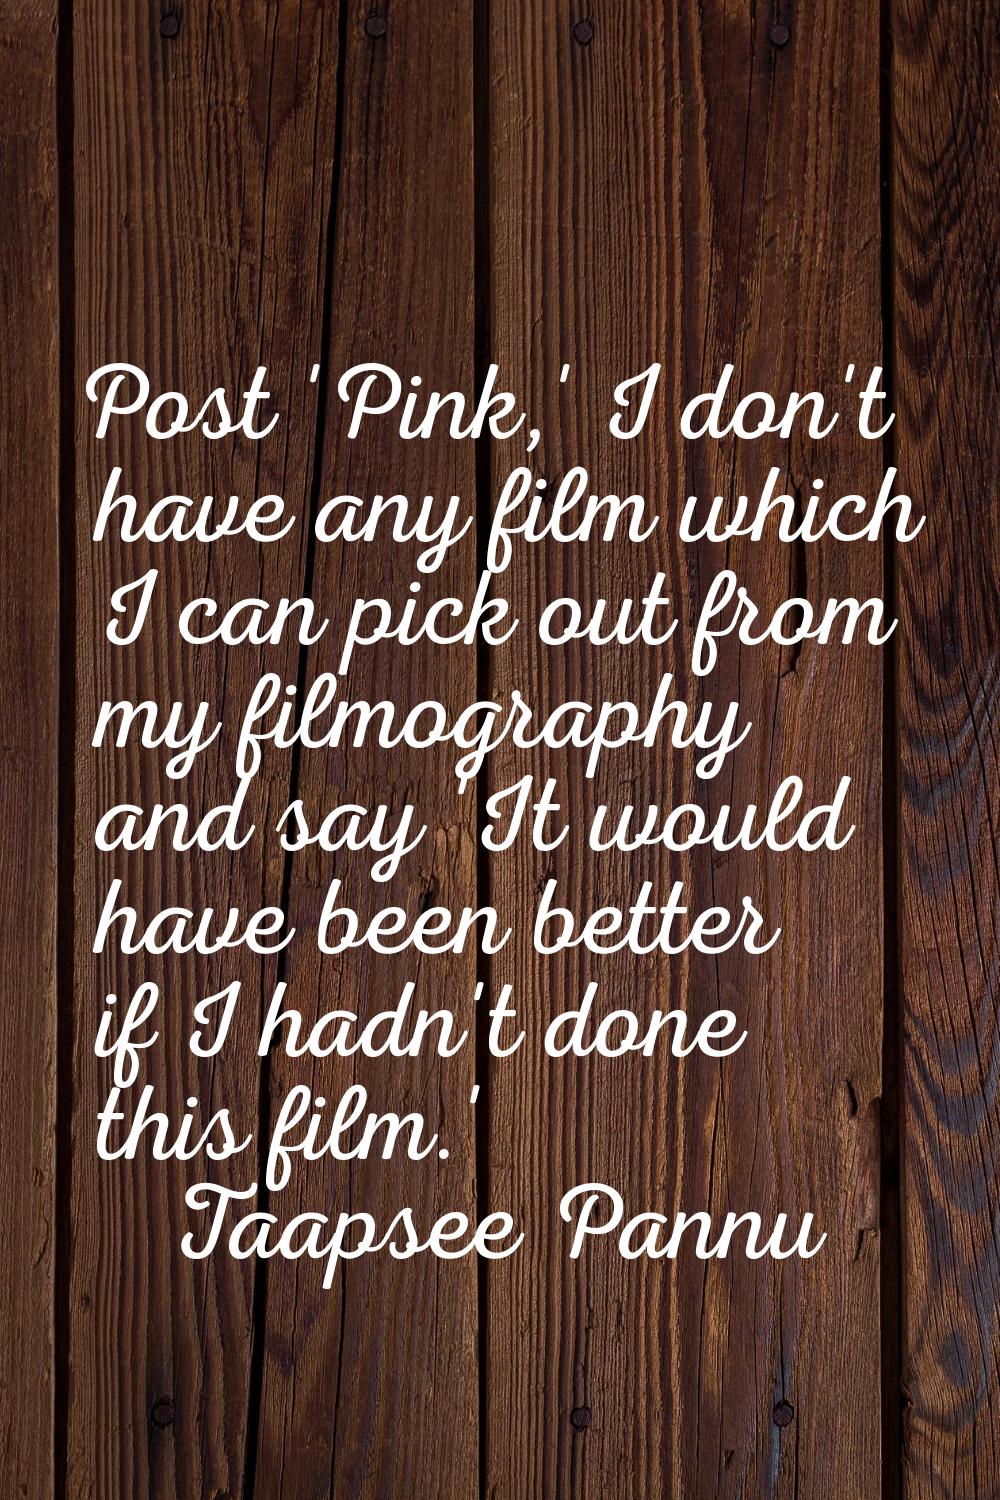 Post 'Pink,' I don't have any film which I can pick out from my filmography and say 'It would have 